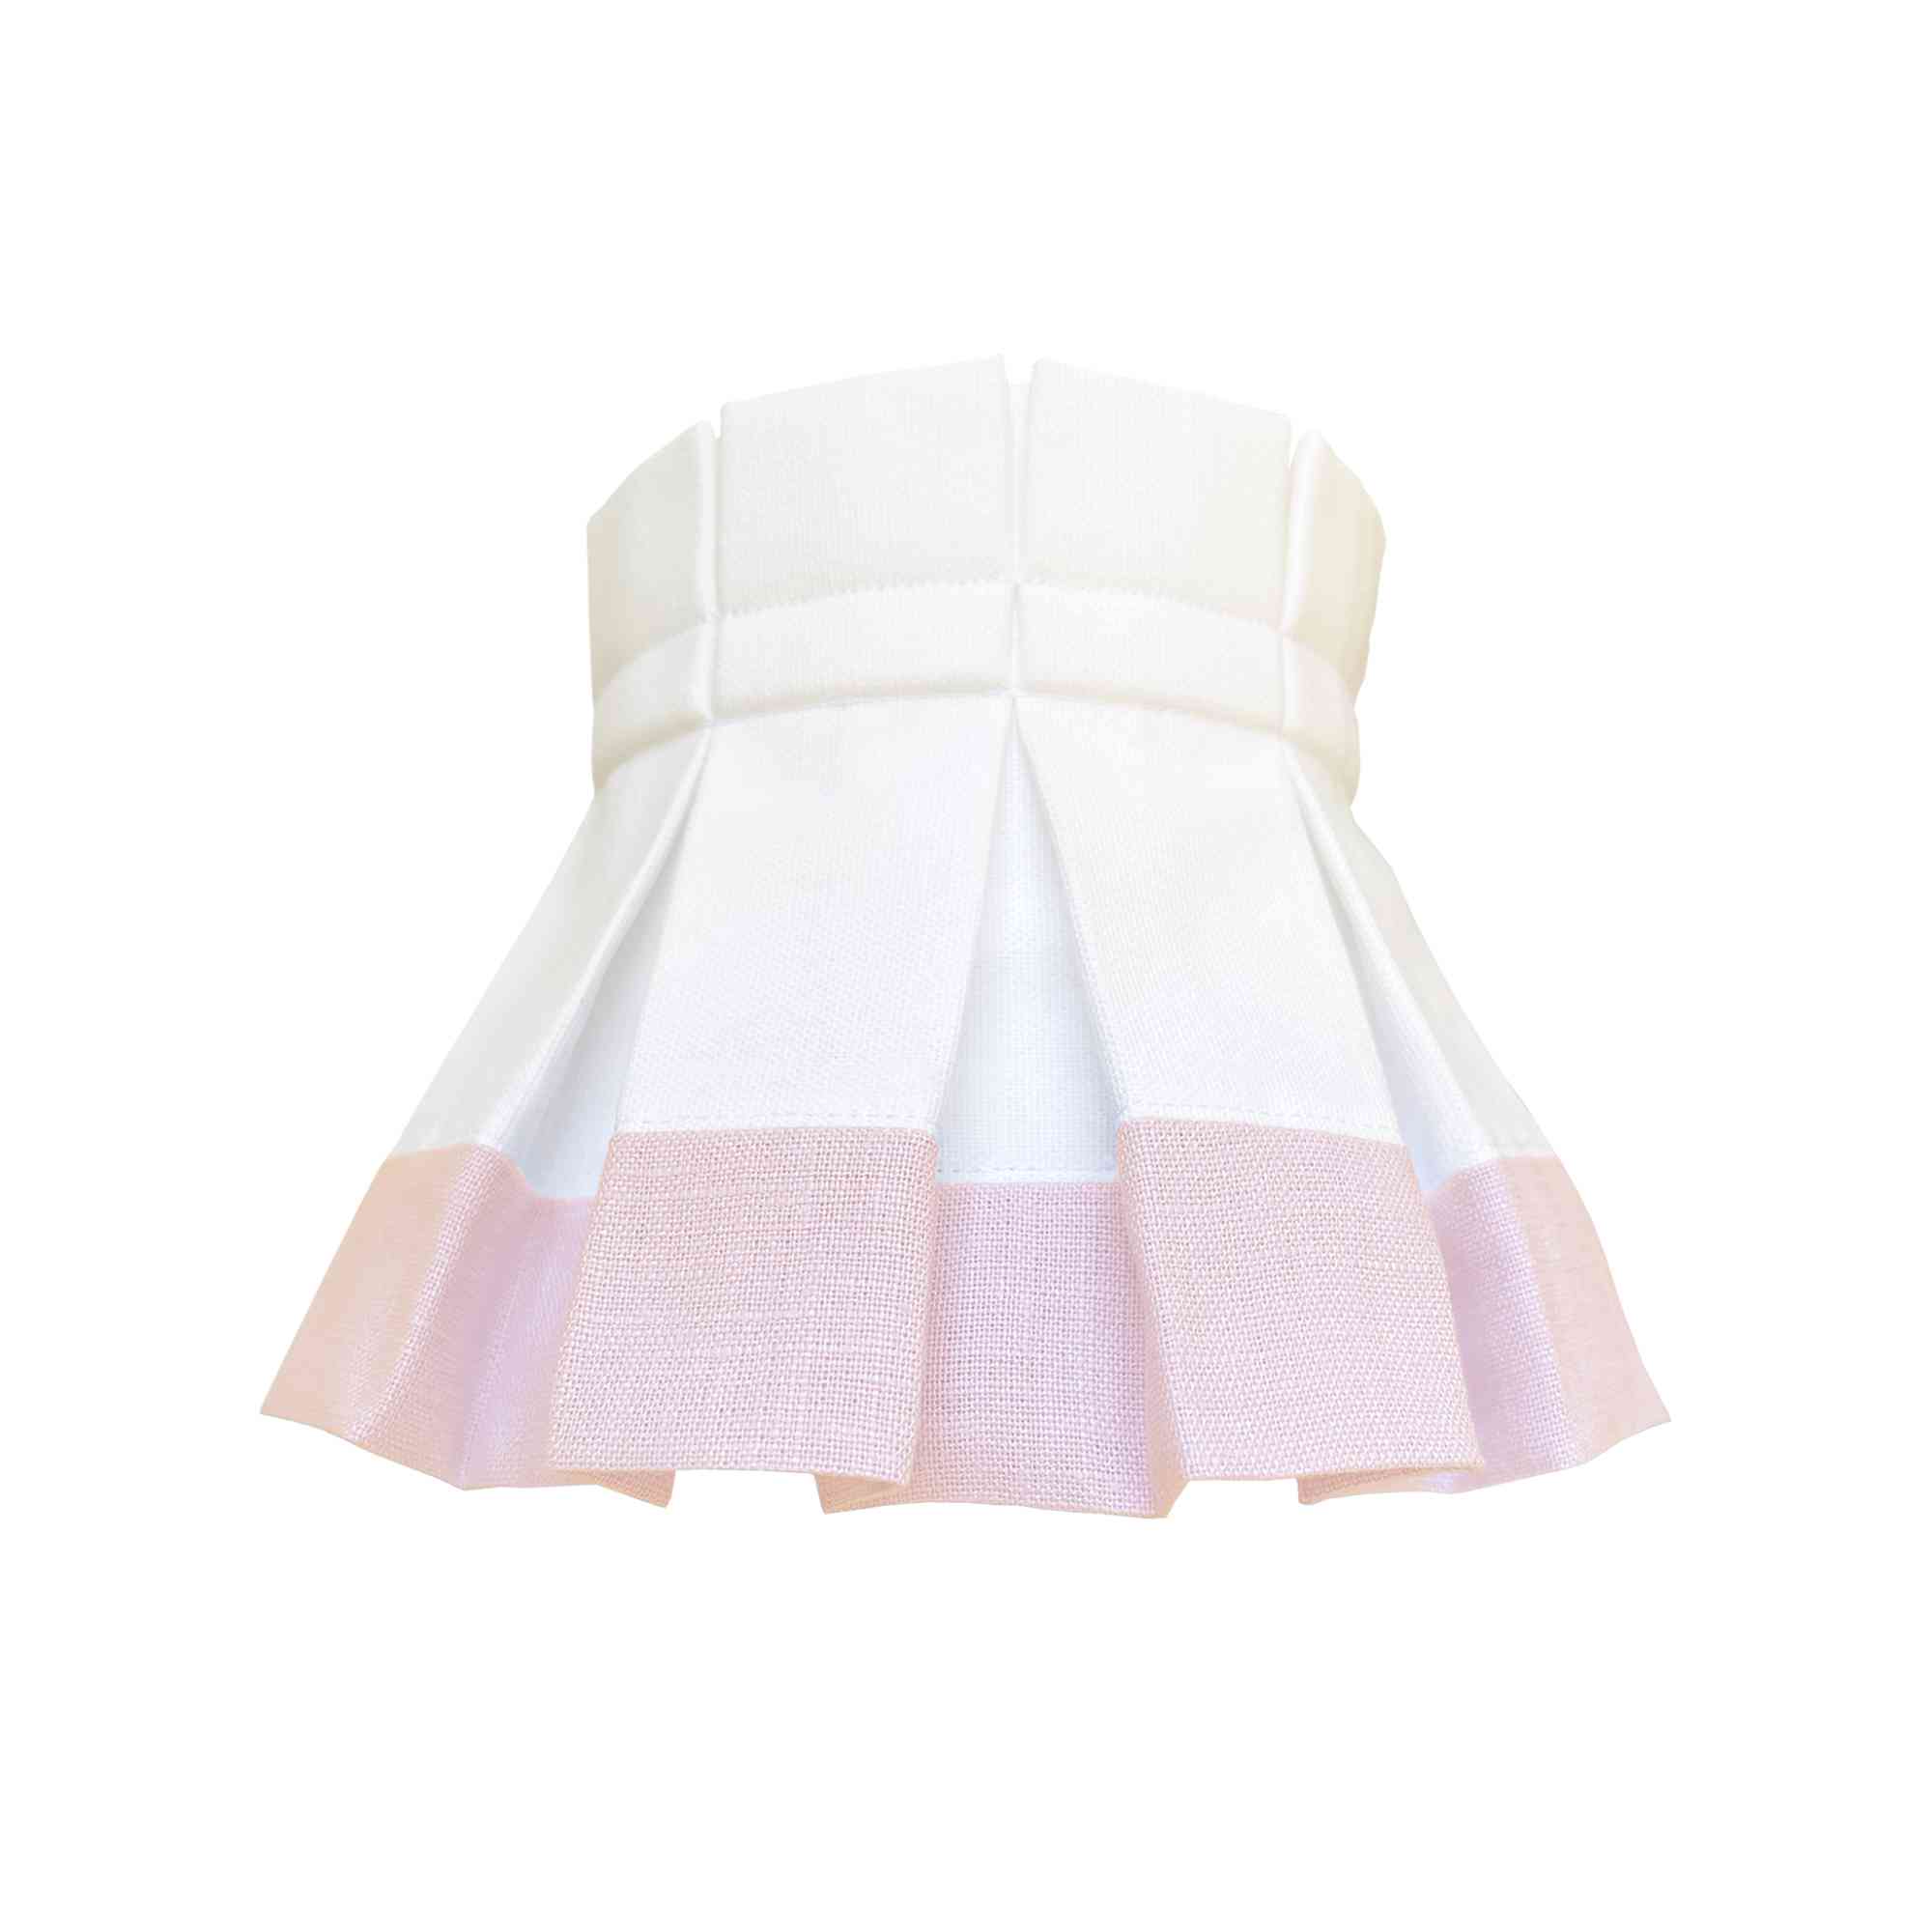 COLORBLOCK CLASSIC BOX PLEAT LAMPSHADE | WHITE/PINK